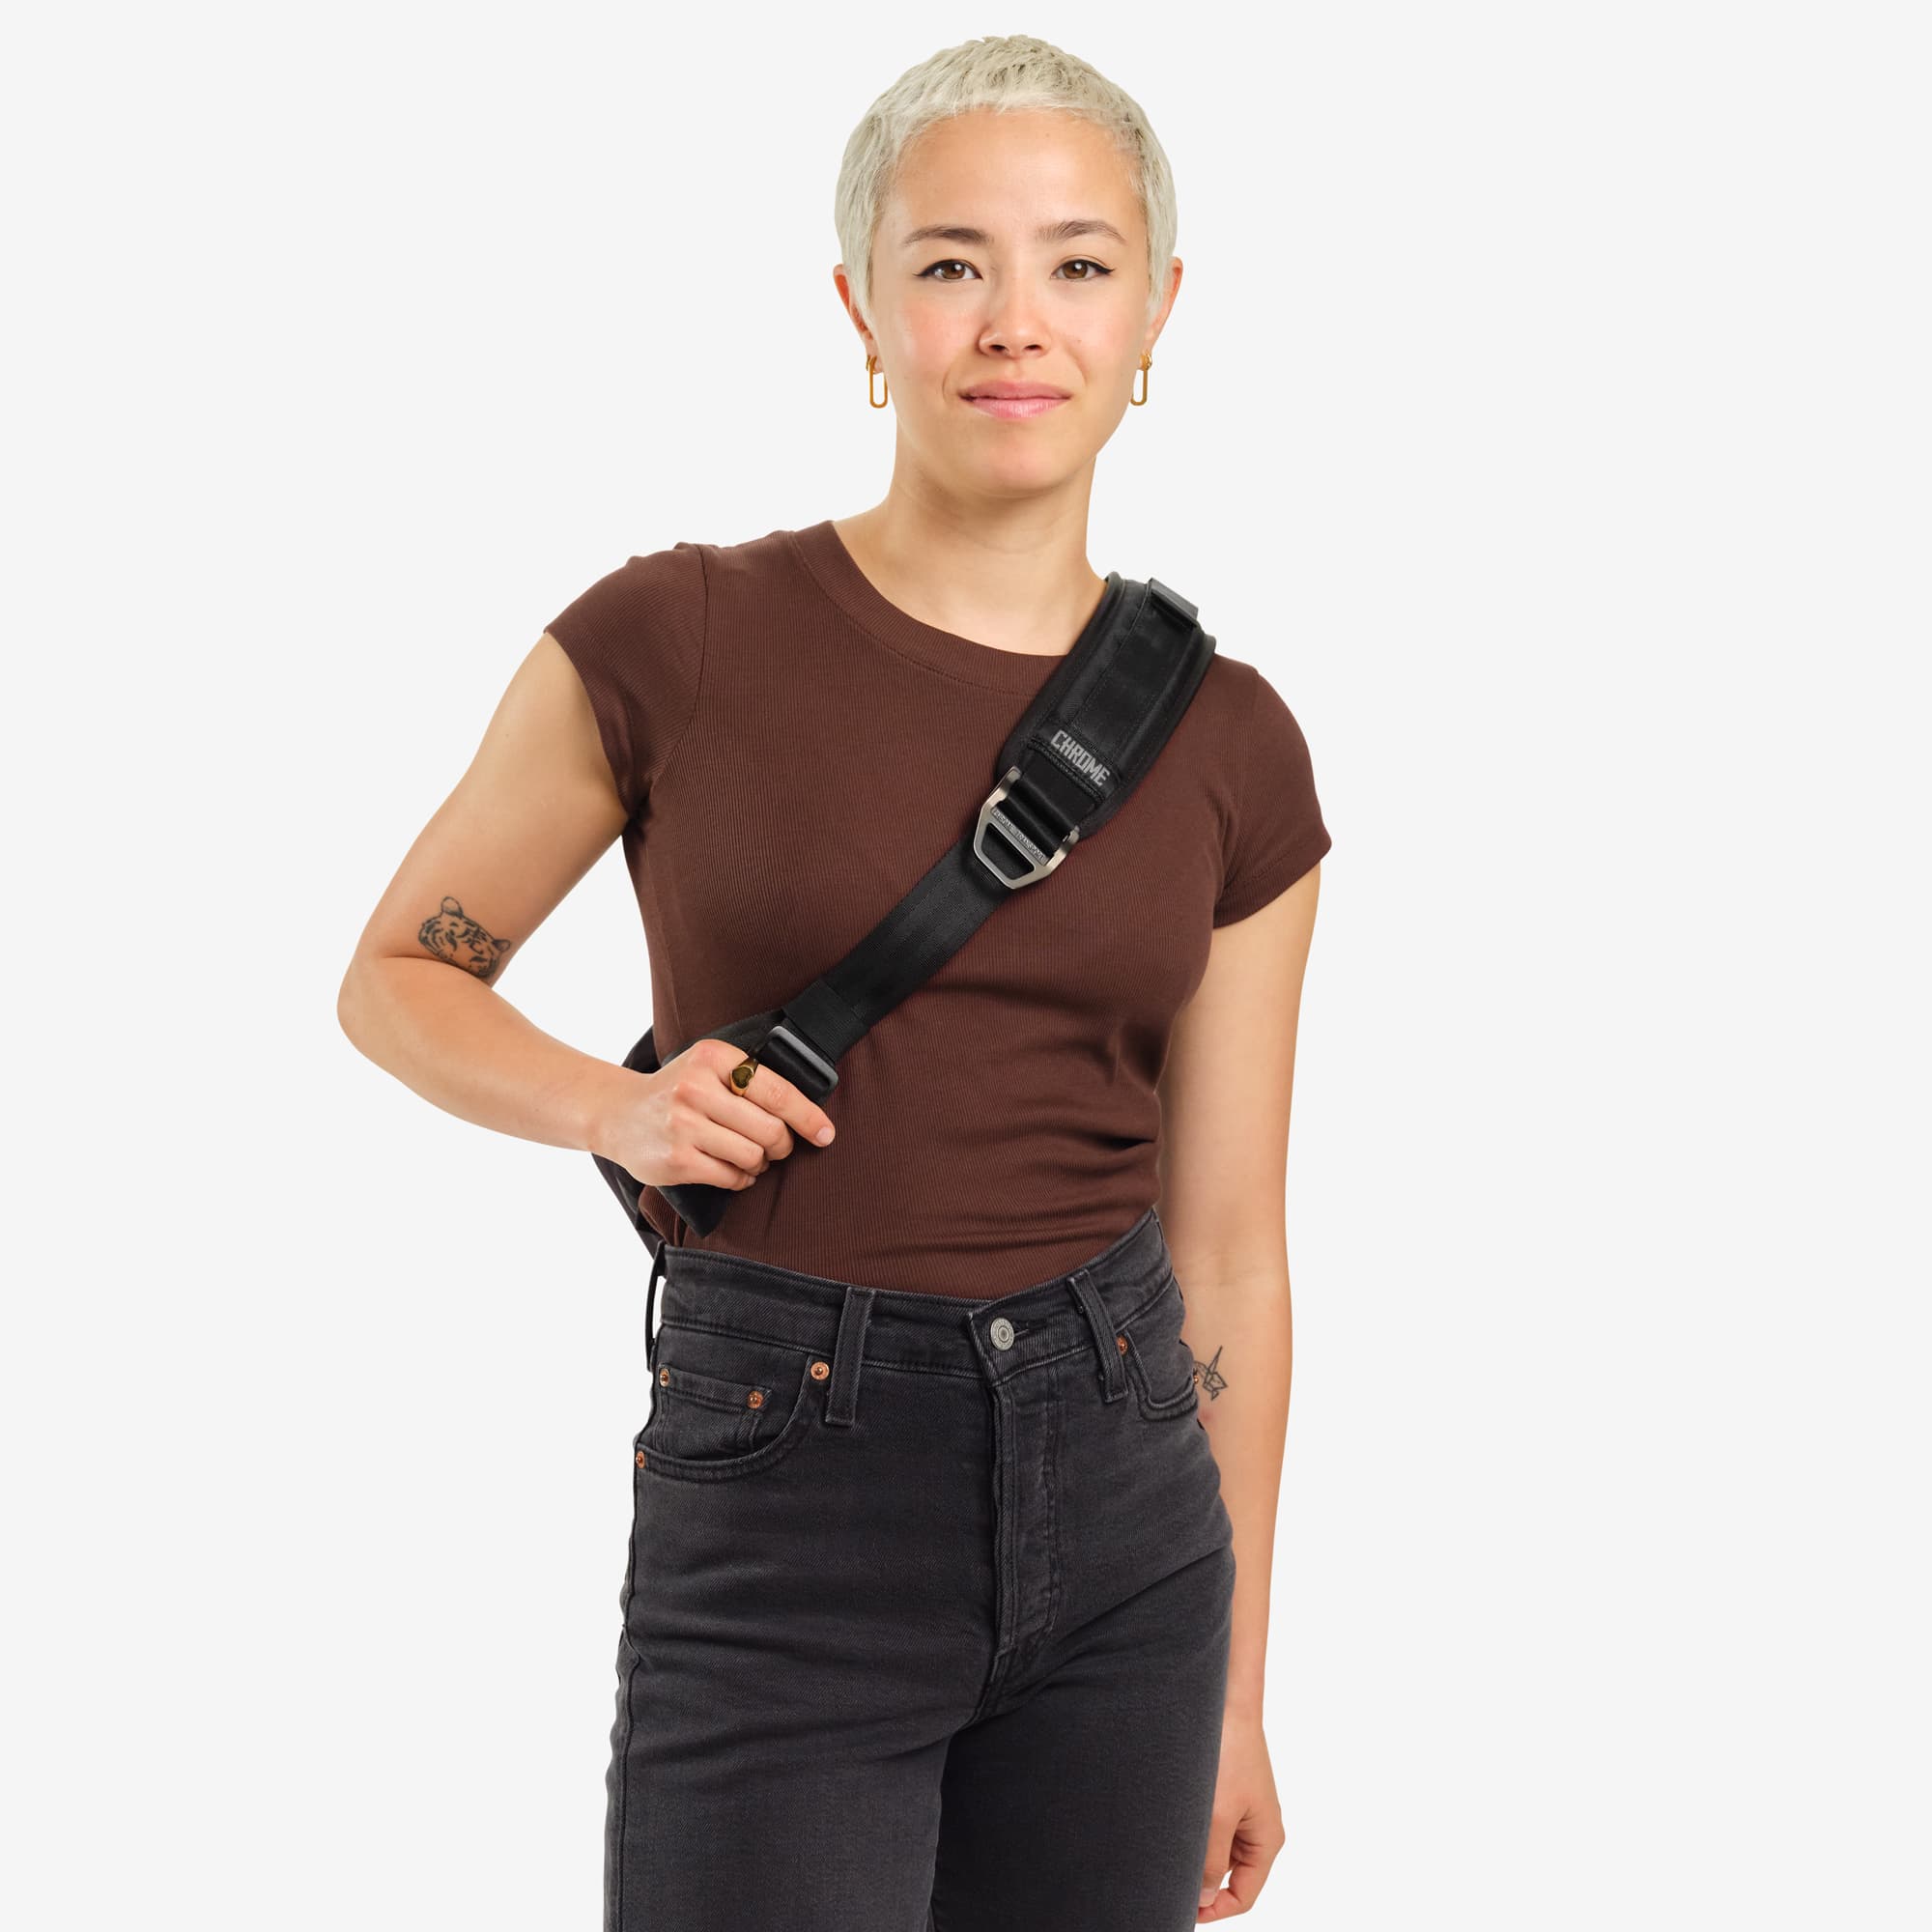 Mini Kadet Sling 5L in black worn by a woman front view